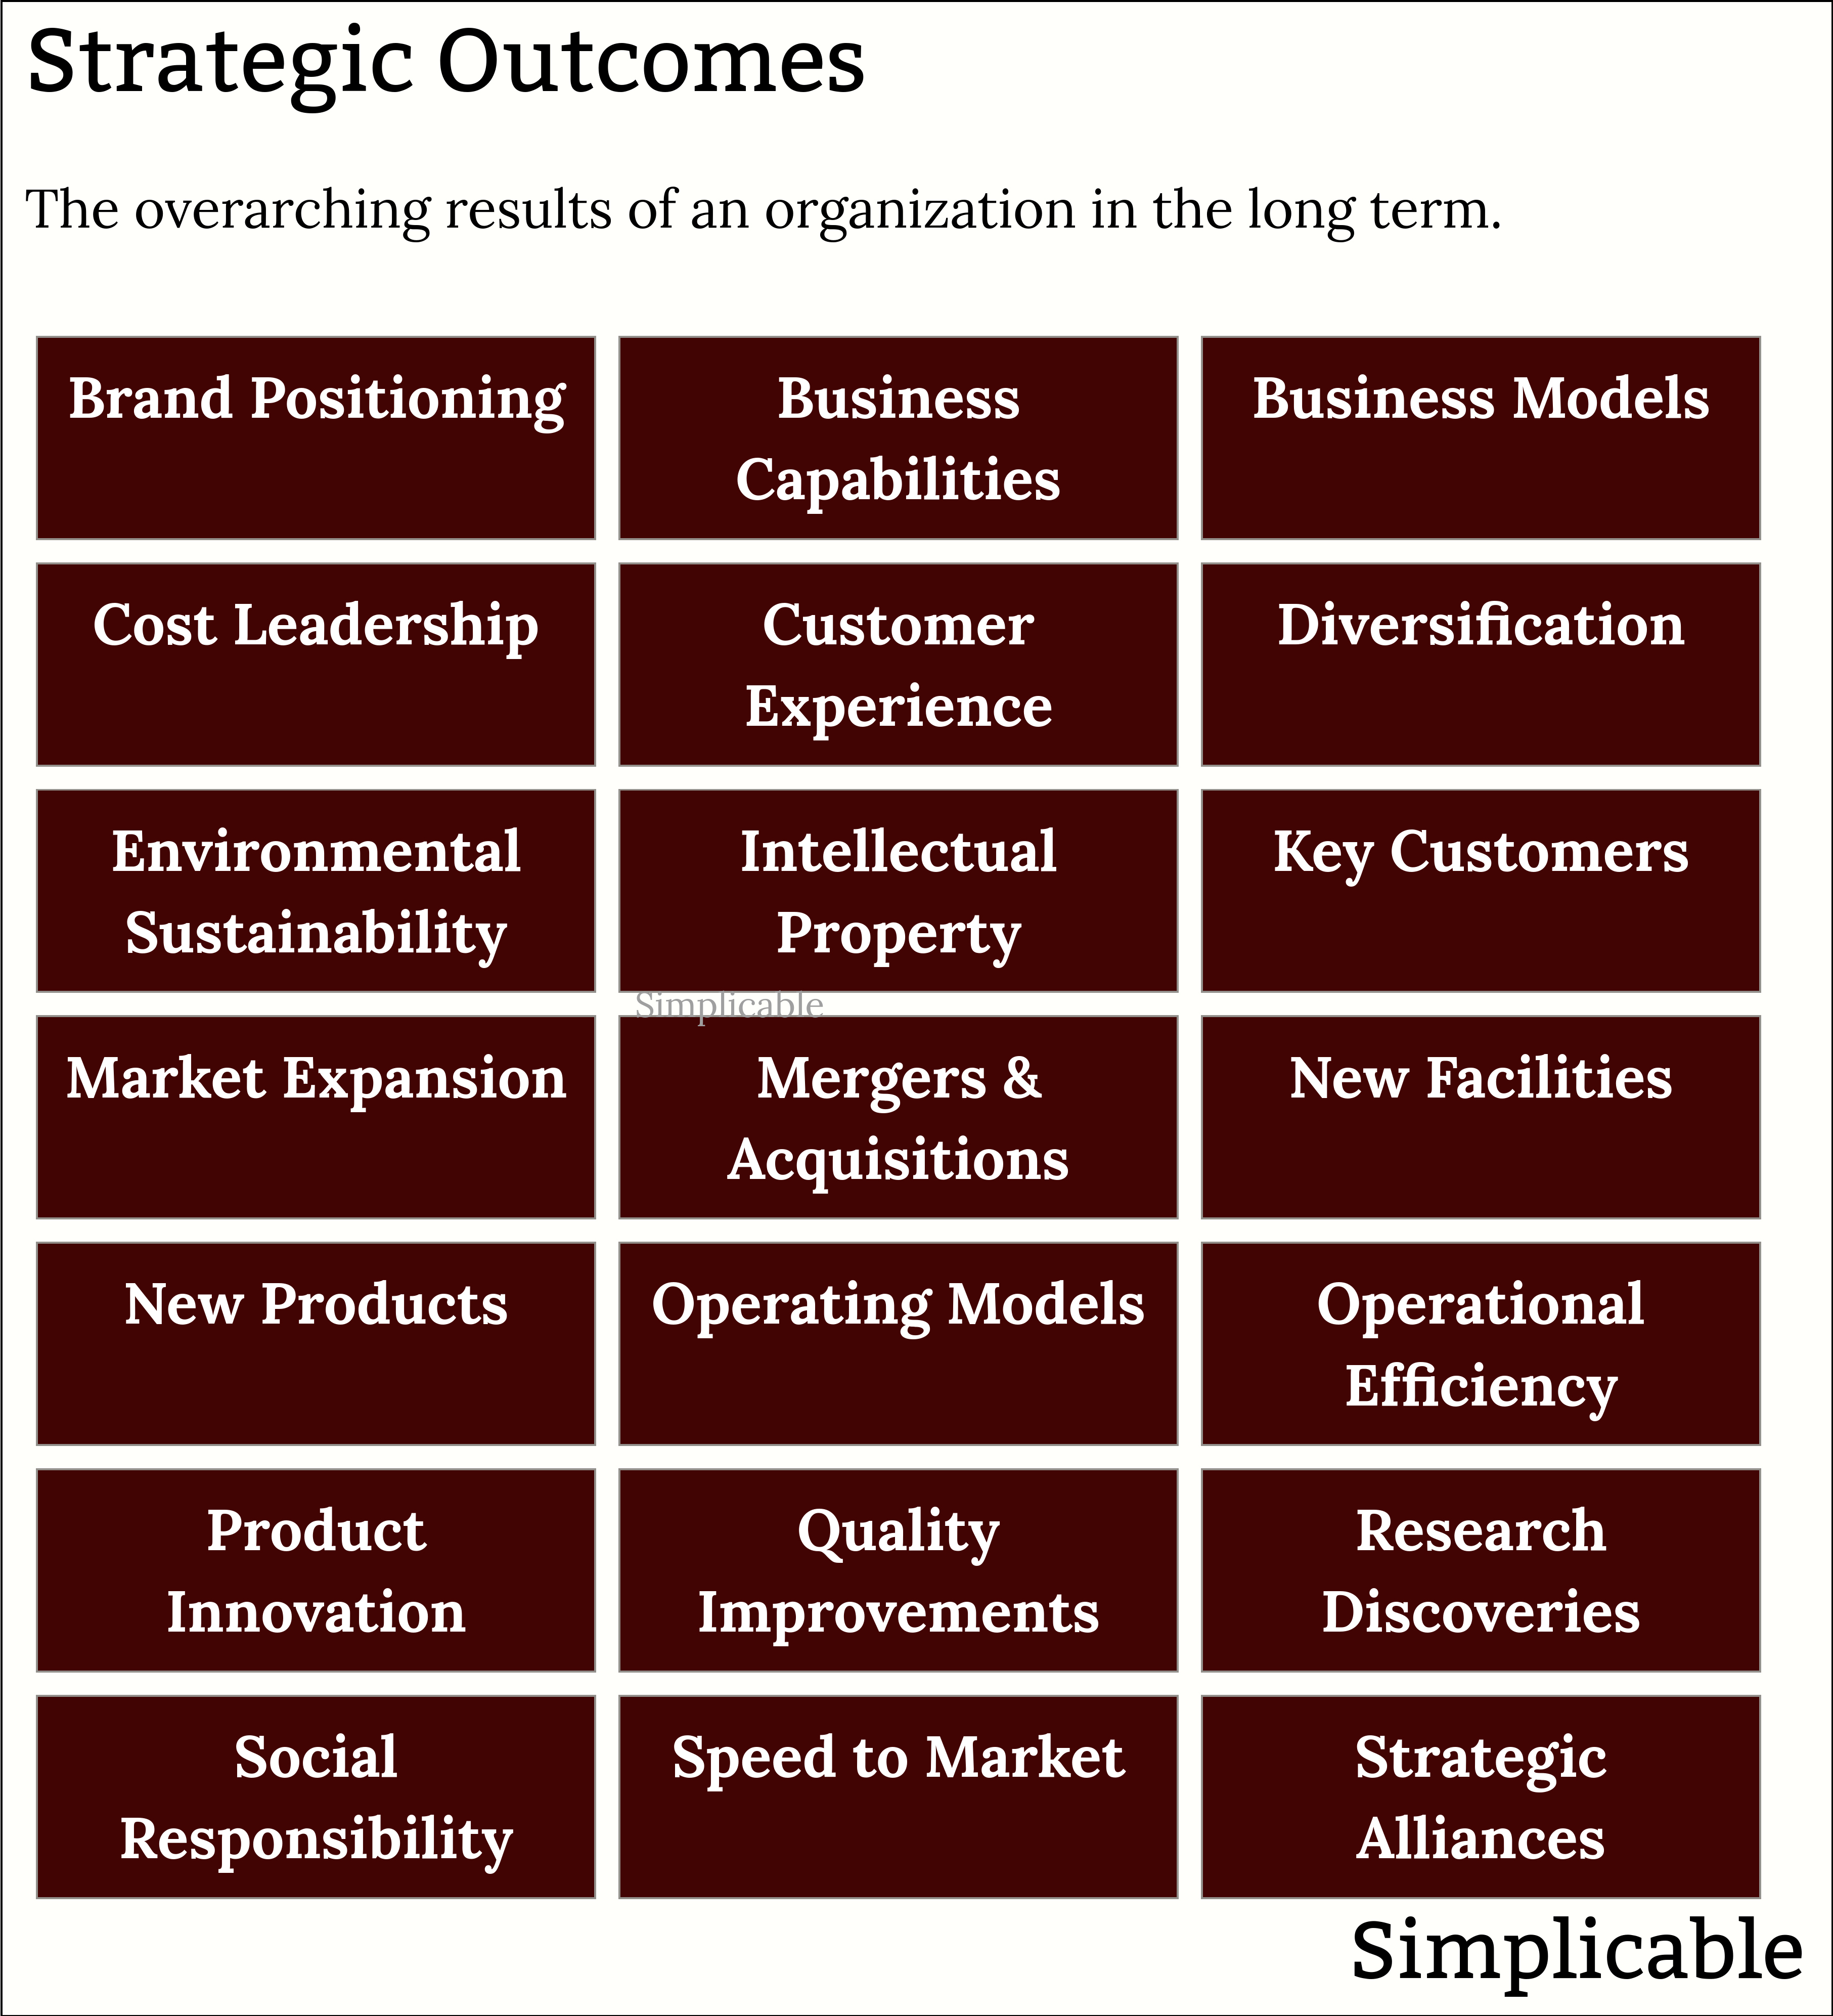 examples of strategic business outcomes